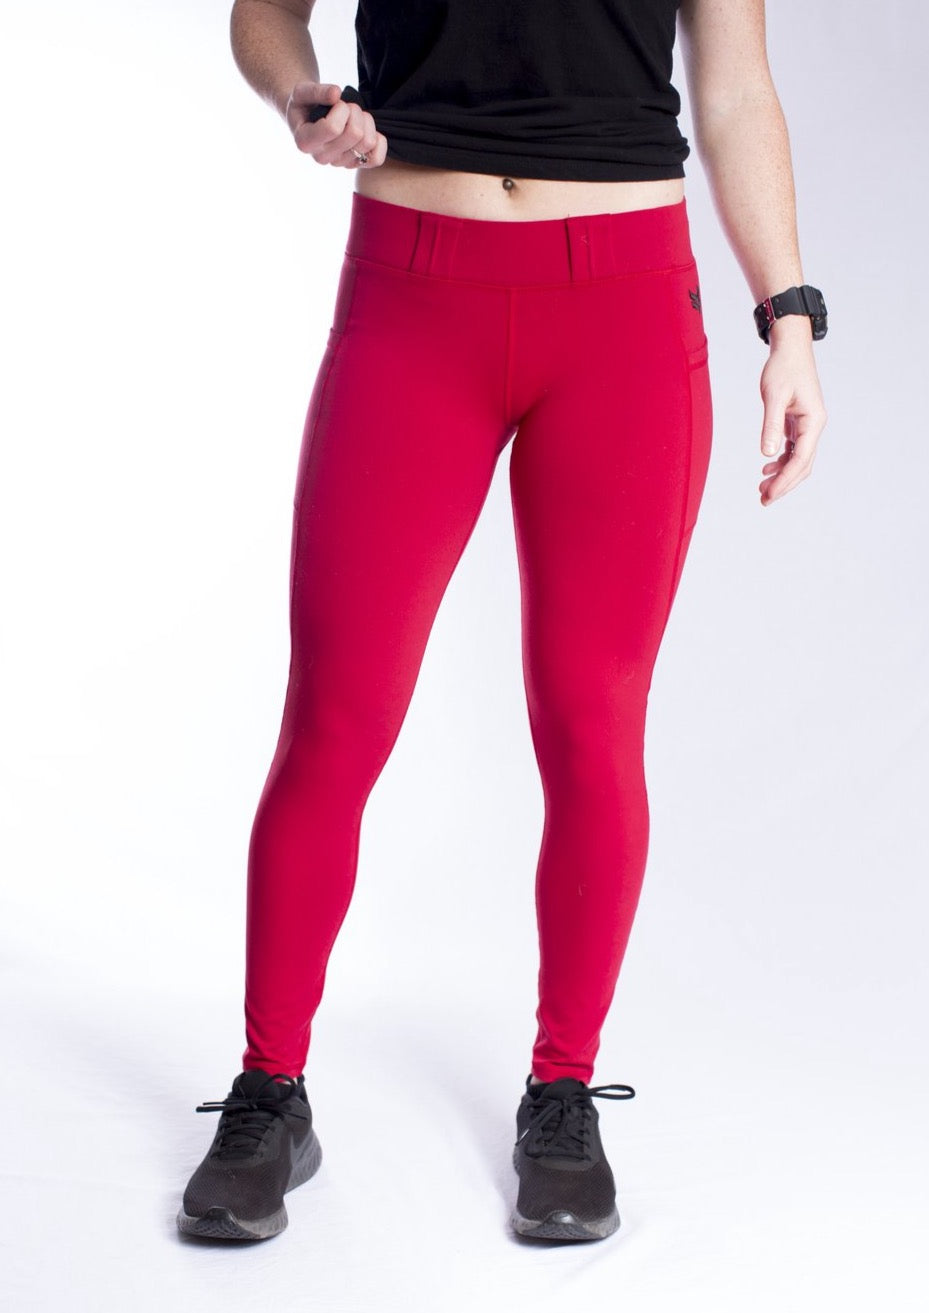 womens chili red conceal carry leggings